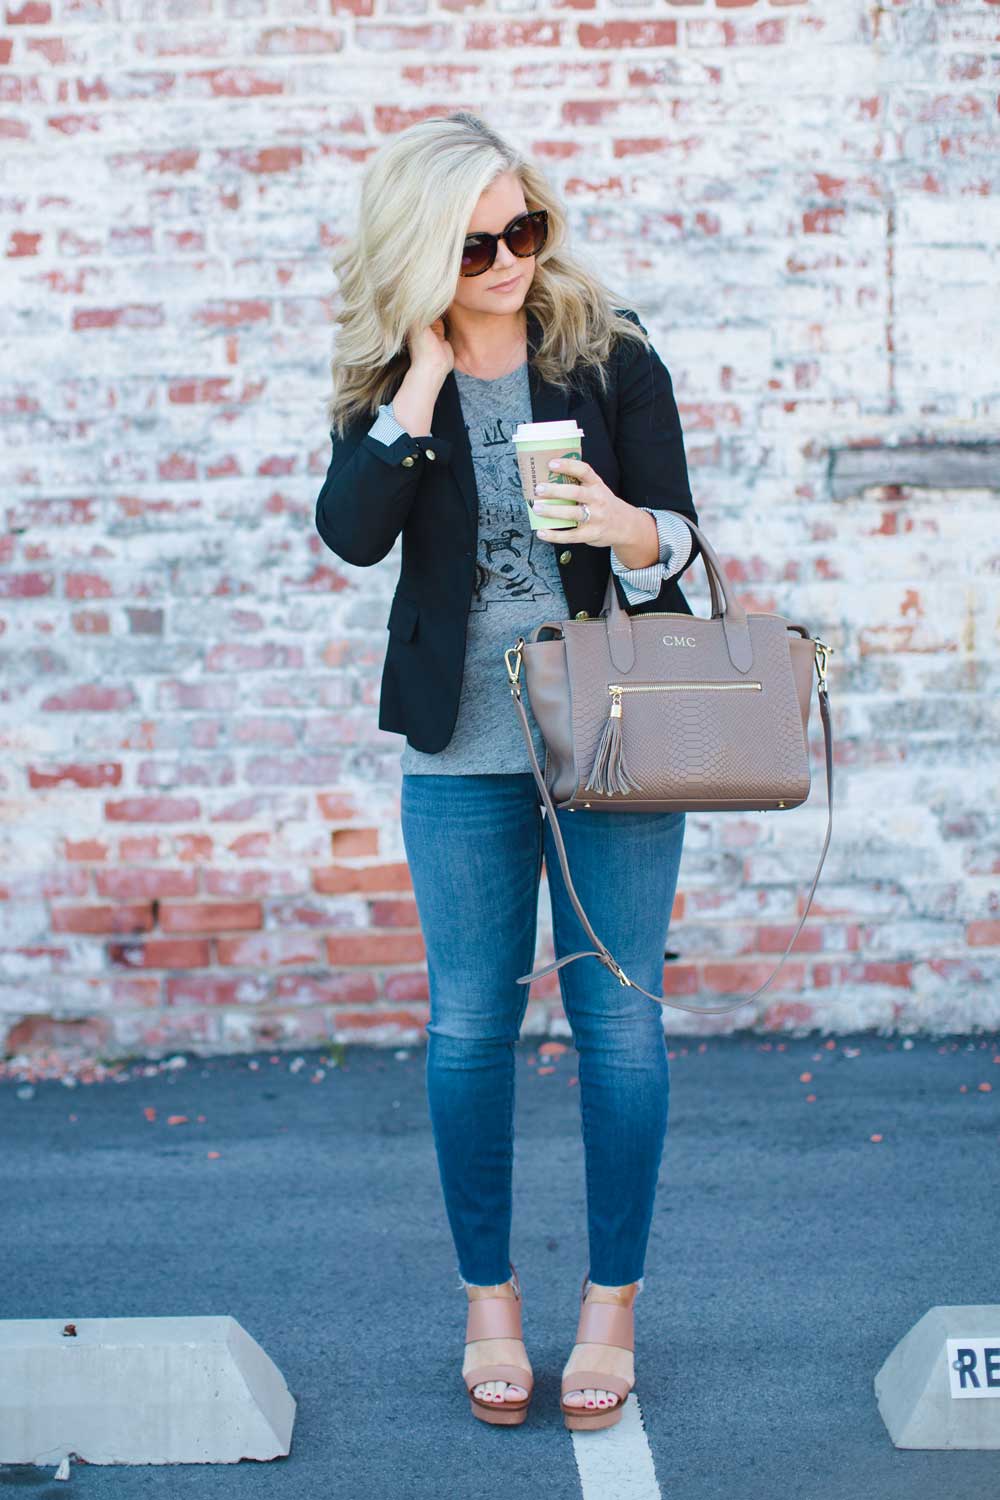 High waisted skinny jeans, frayed skinny jeans, blazer and skinny jeans, spring outfit inspiration from Cristin Cooper of The Southern Style Guide